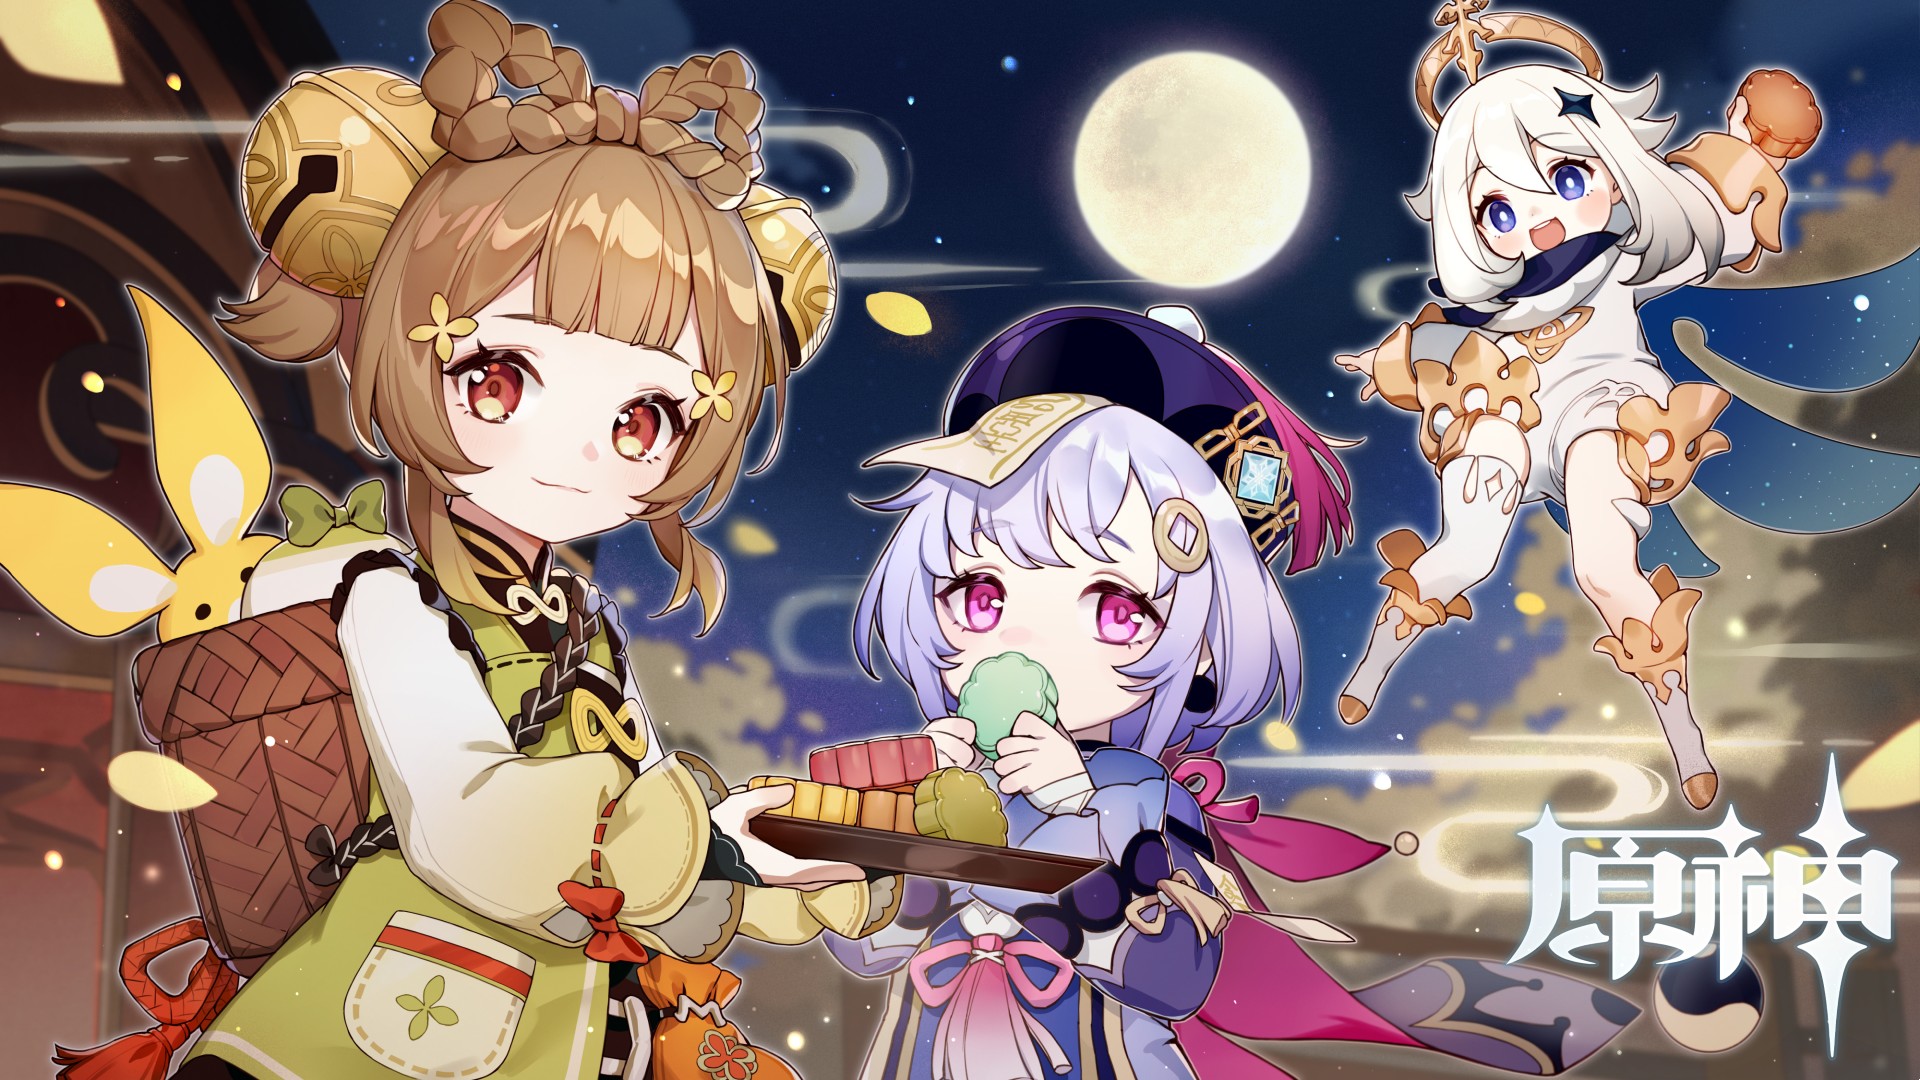 Genshin Impact Yaoyao shares sweets with other characters during the festival